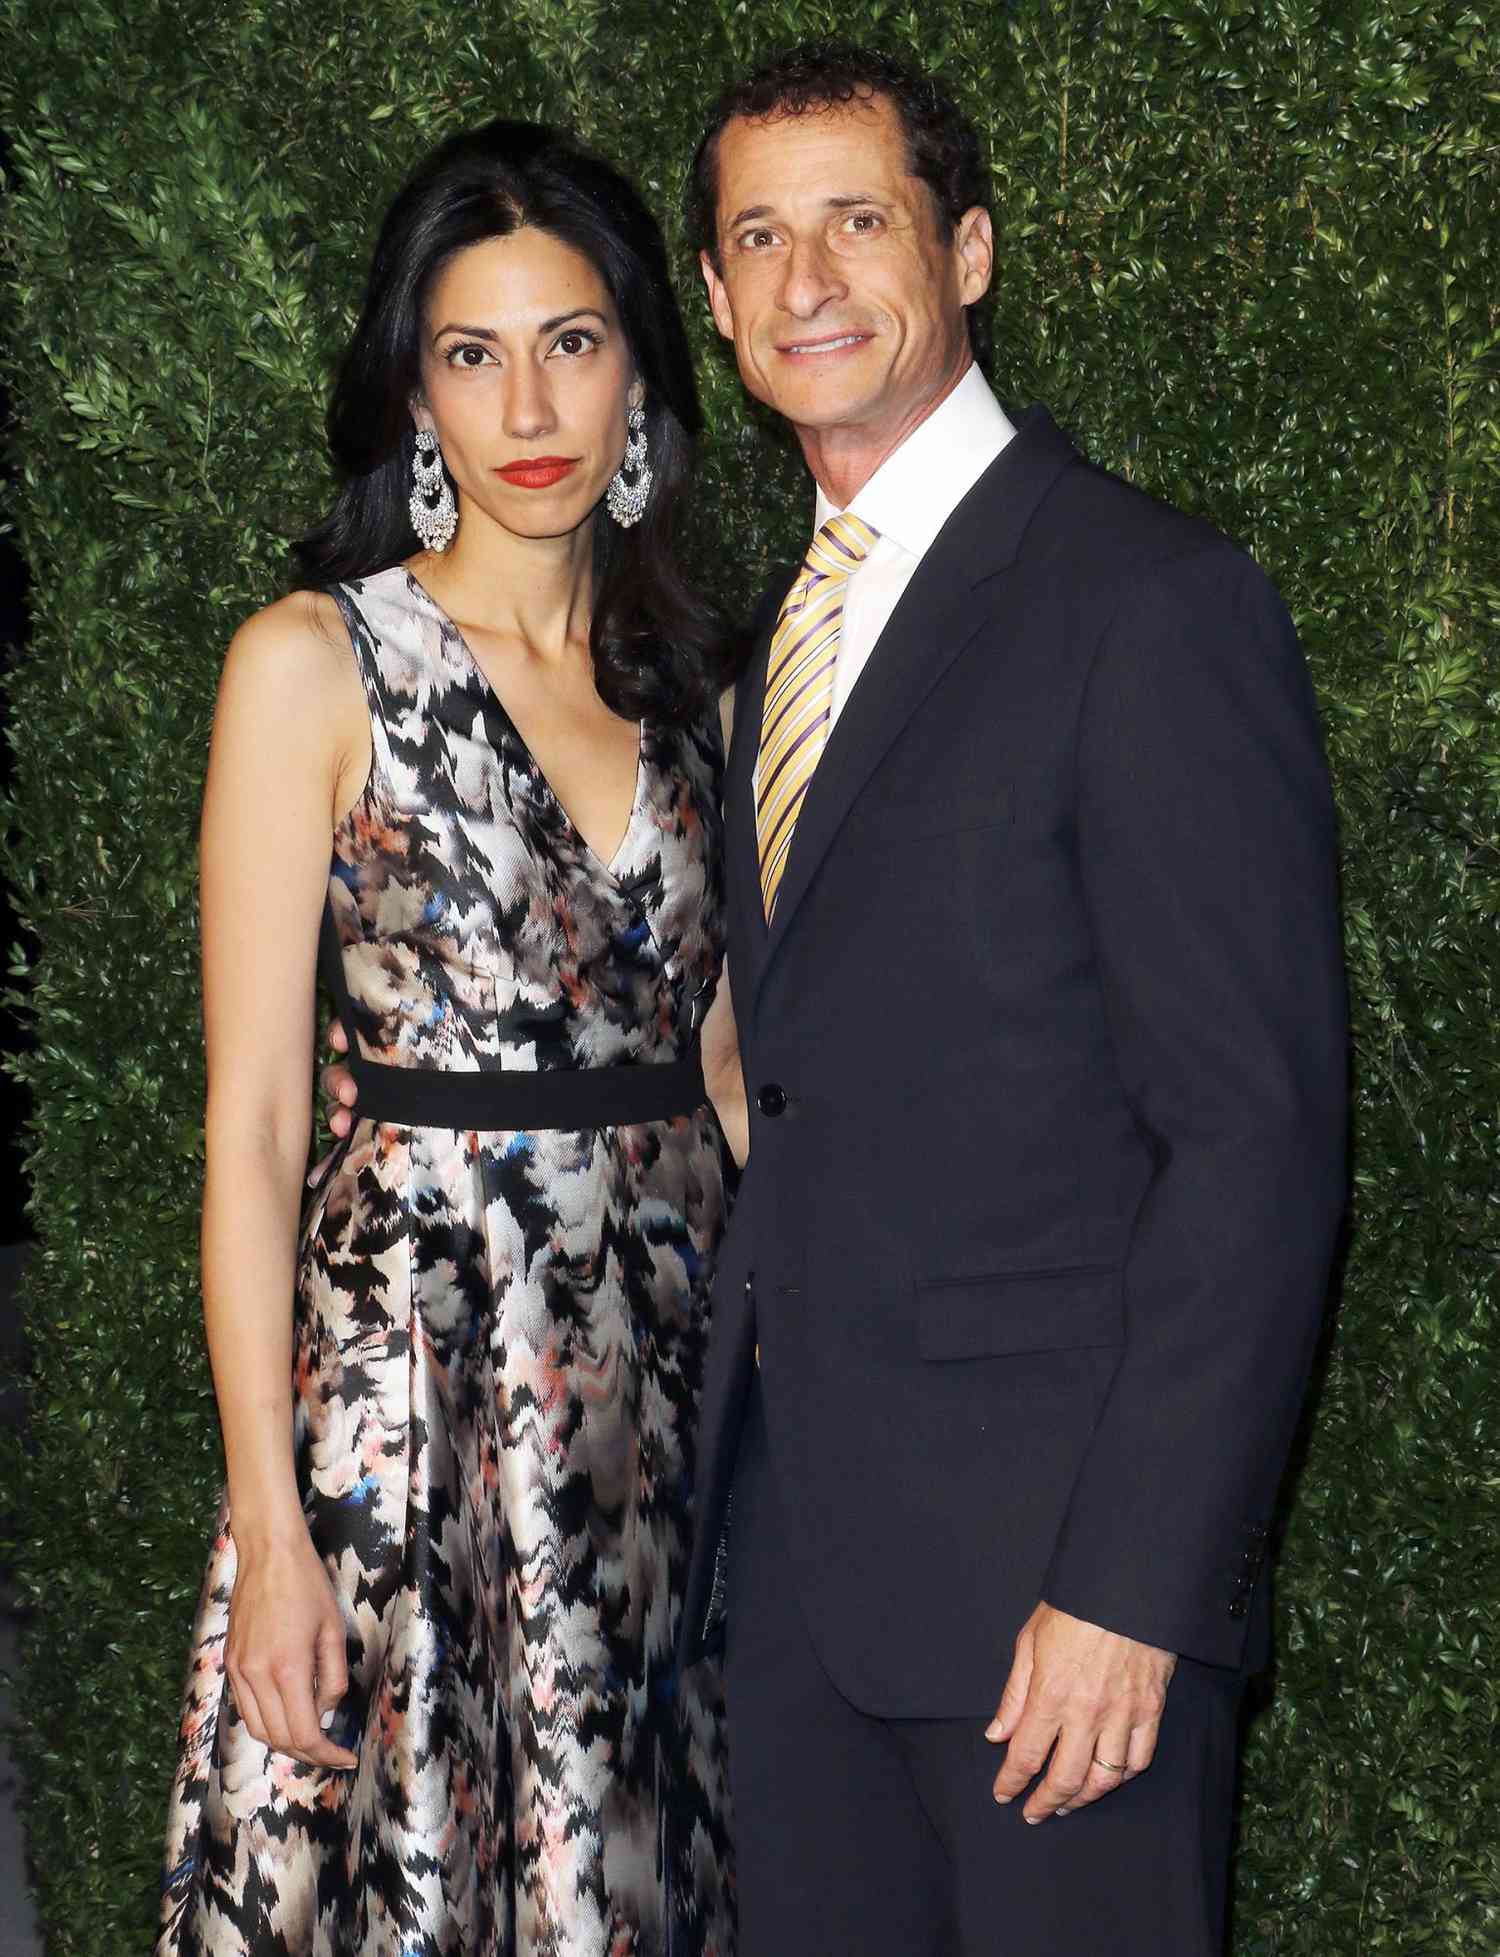 Political staffer Huma Abedin and former U.S. Representative Anthony Weiner attend the 12th annual CFDA/Vogue Fashion Fund Awards at Spring Studios on November 2, 2015 in New York City